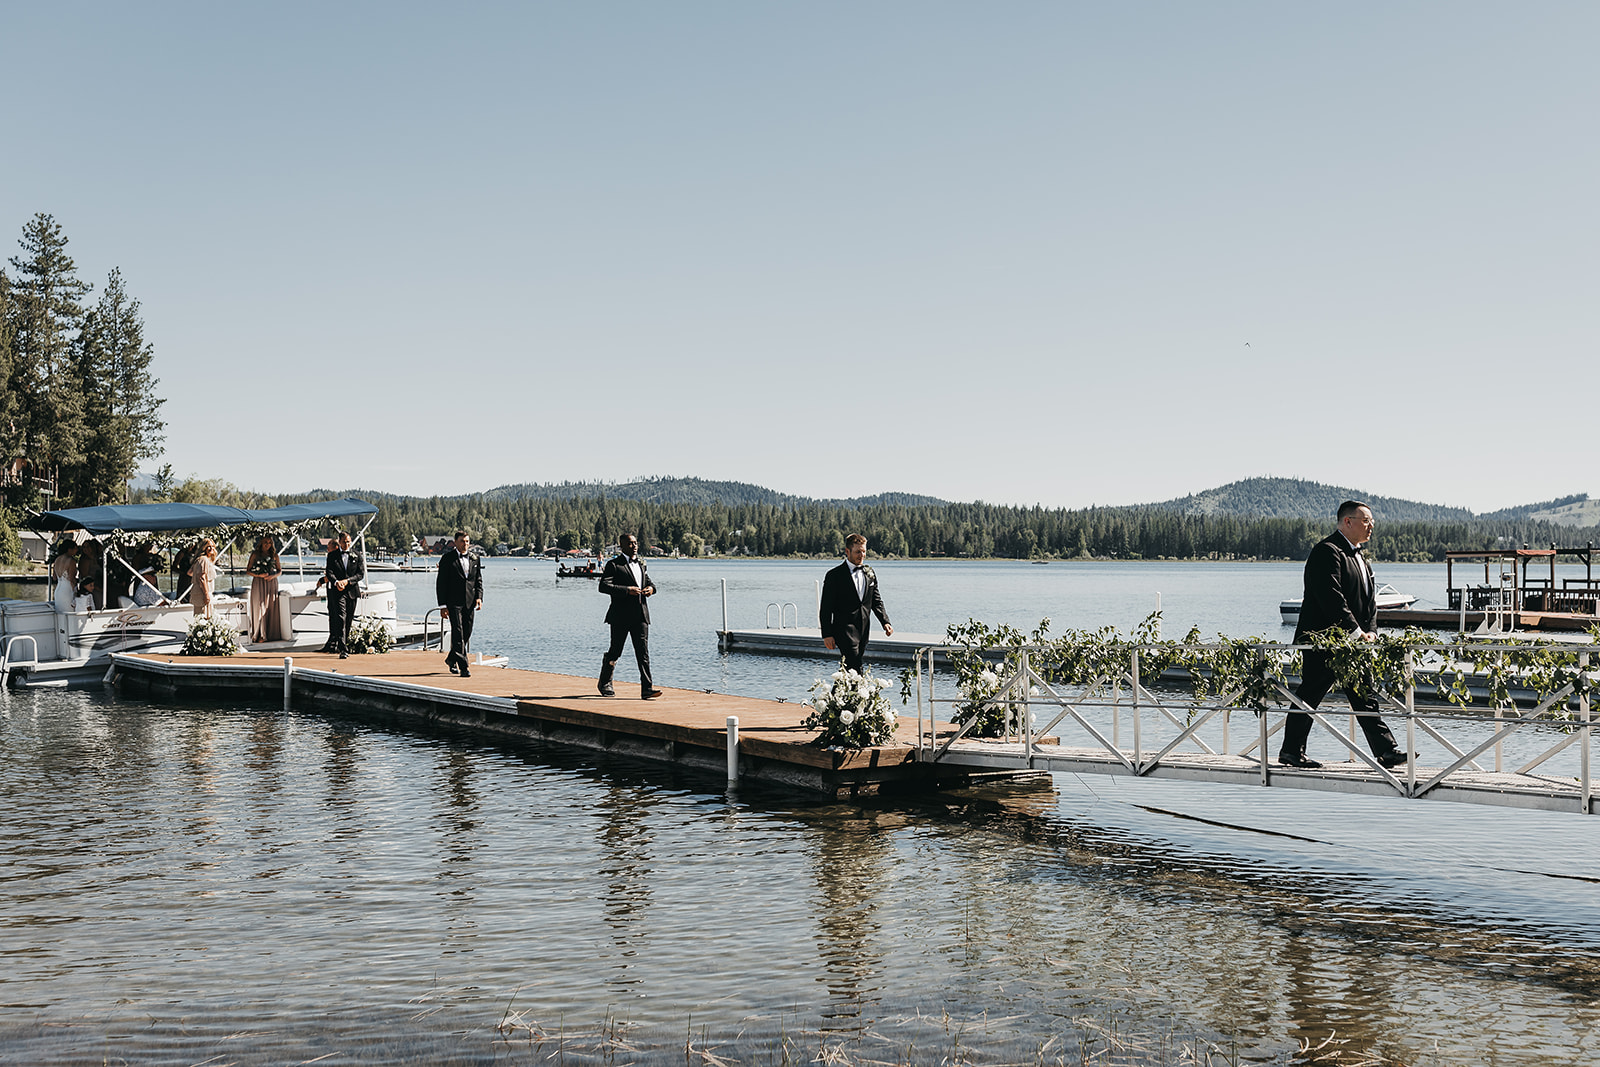 Wedding party getting off pontoon boat on to the dock at a private lake house wedding.